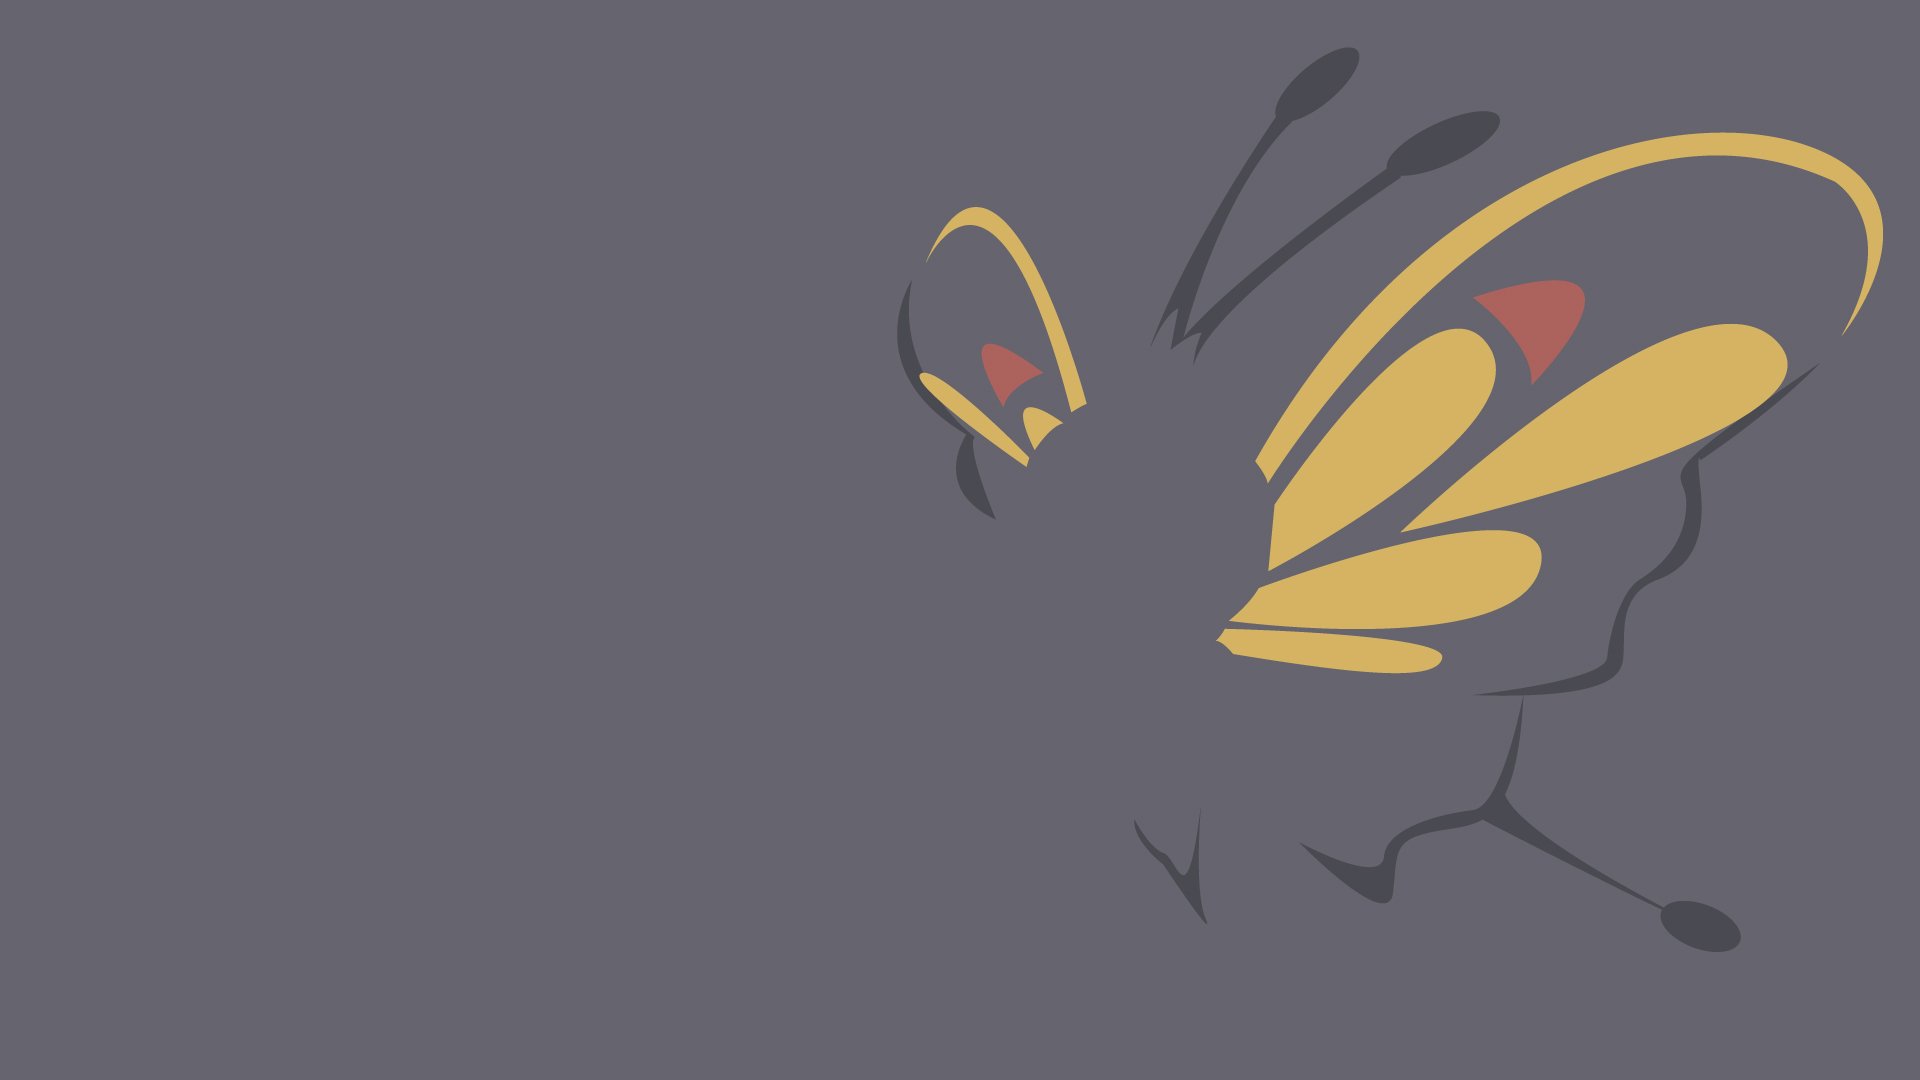 beautifly and butterfree